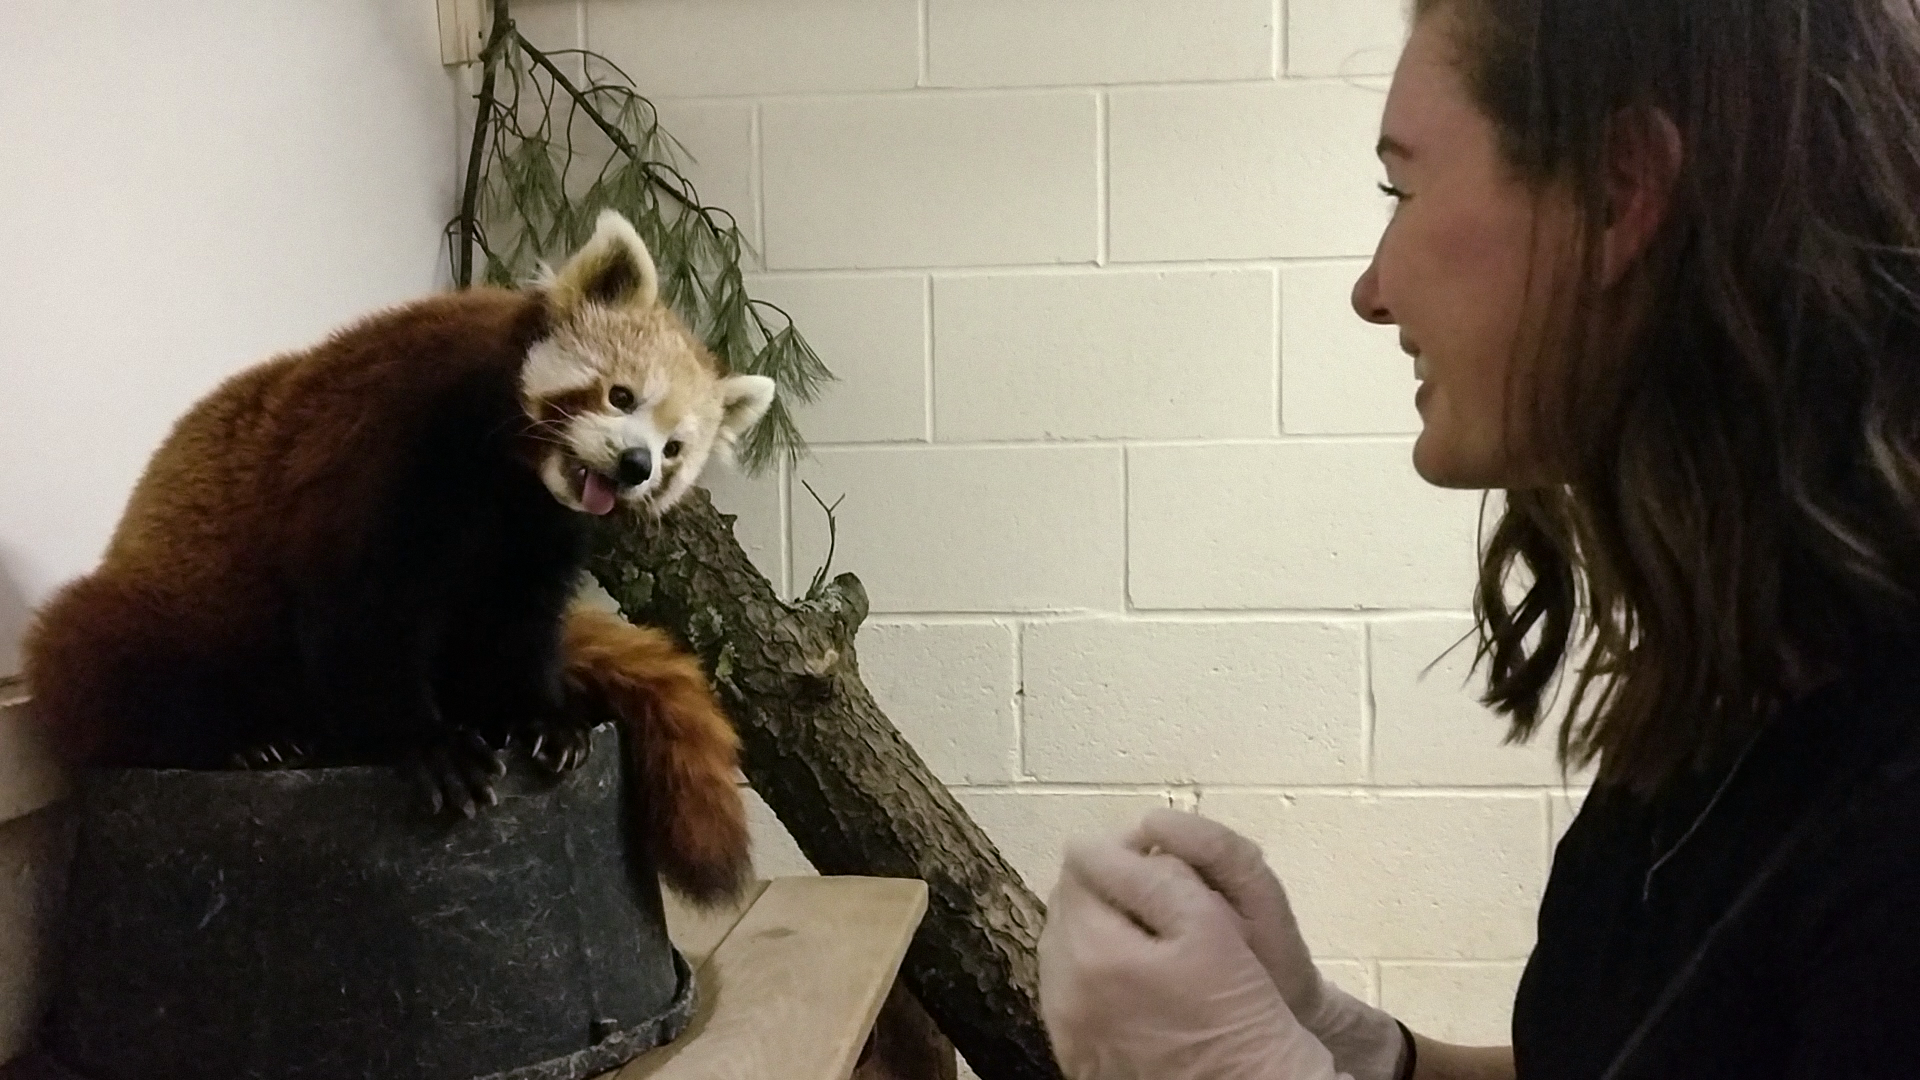 Alyssa and Amber the red panda smile at each other